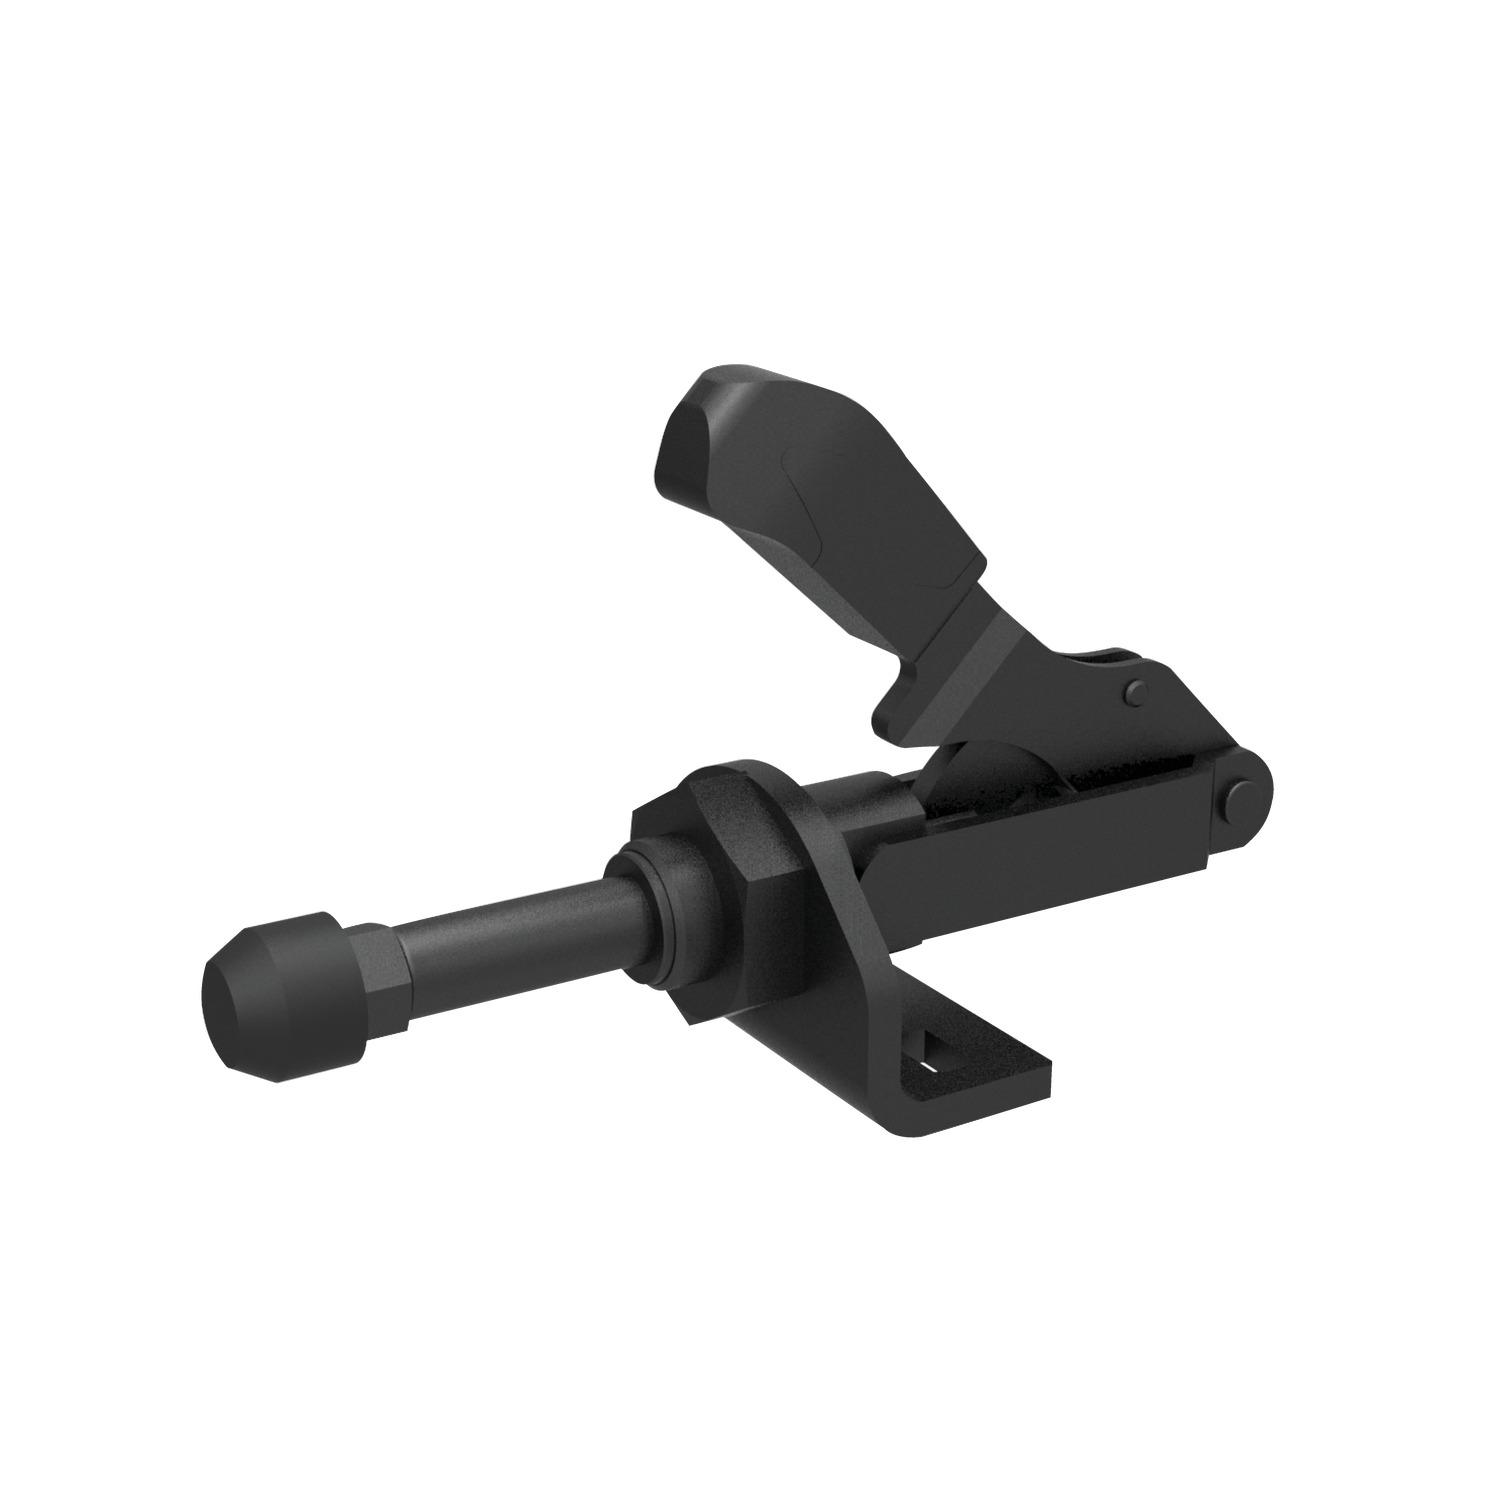 42000.W0501 Push-Pull Type Toggle Clamps - Black 1 - 1,0 - 1,0 - M 4x20